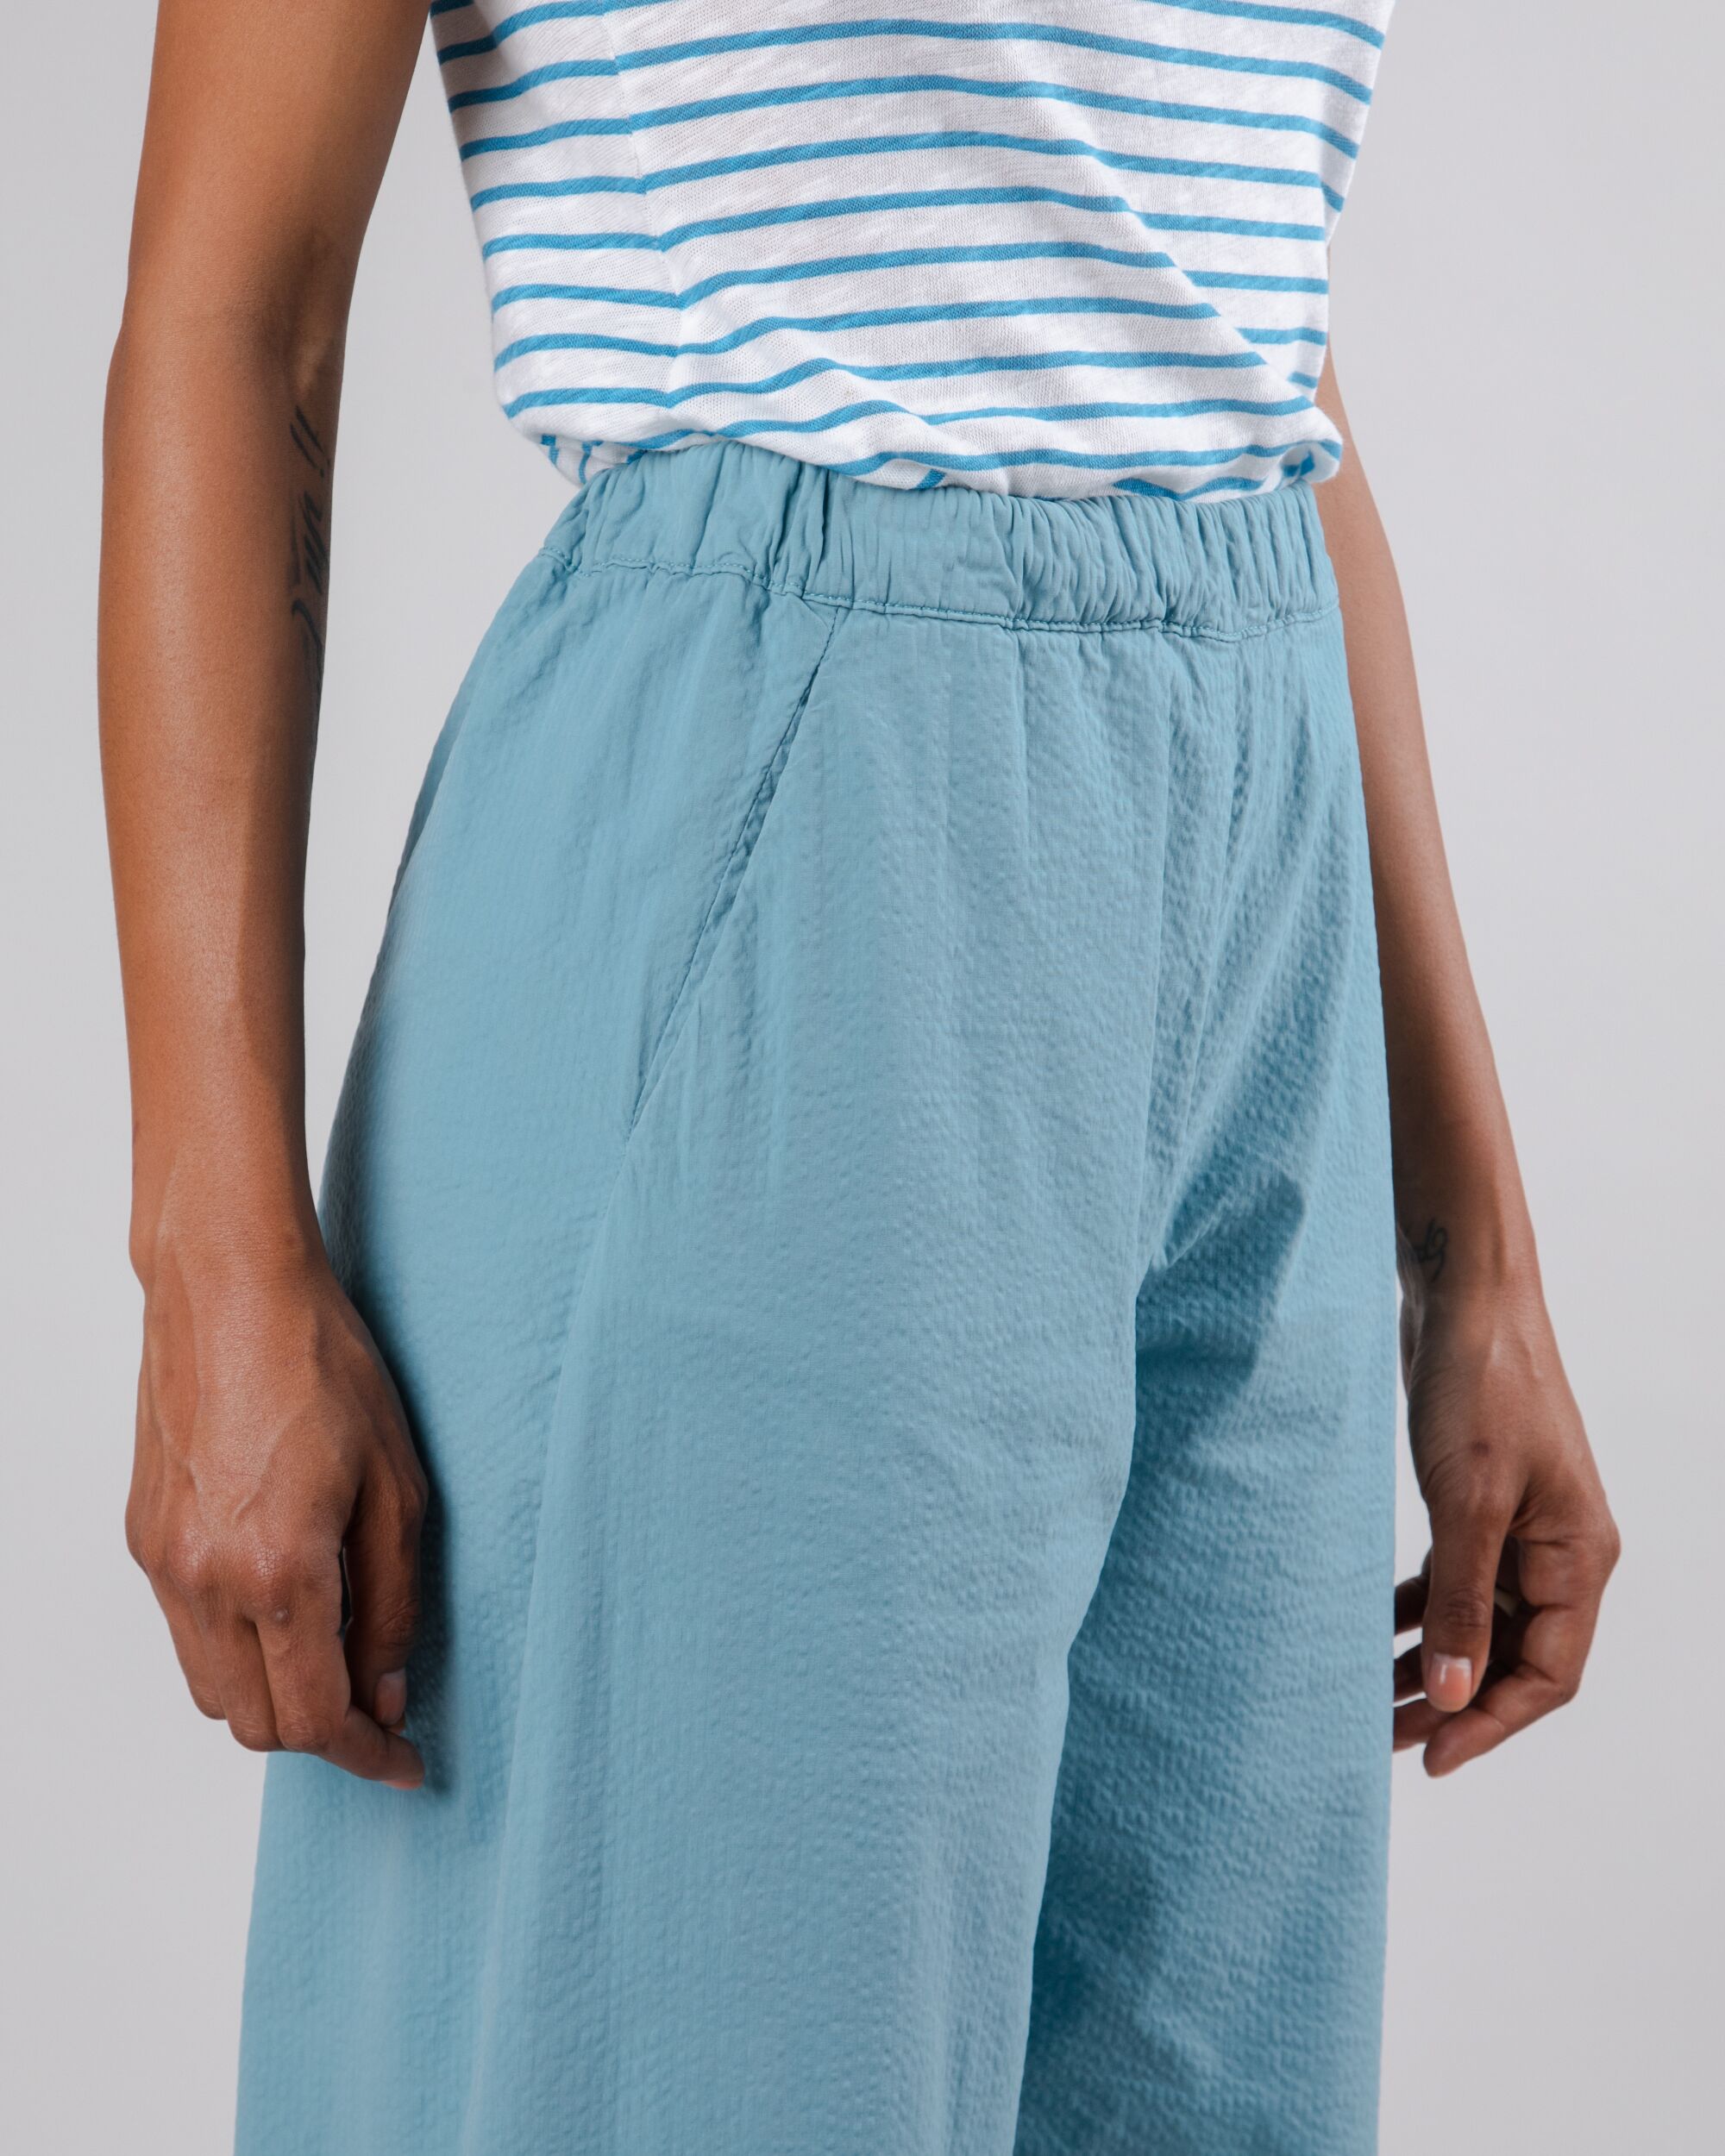 Oversize Picnic trousers in ocean blue made from organic cotton by Brava Fabrics